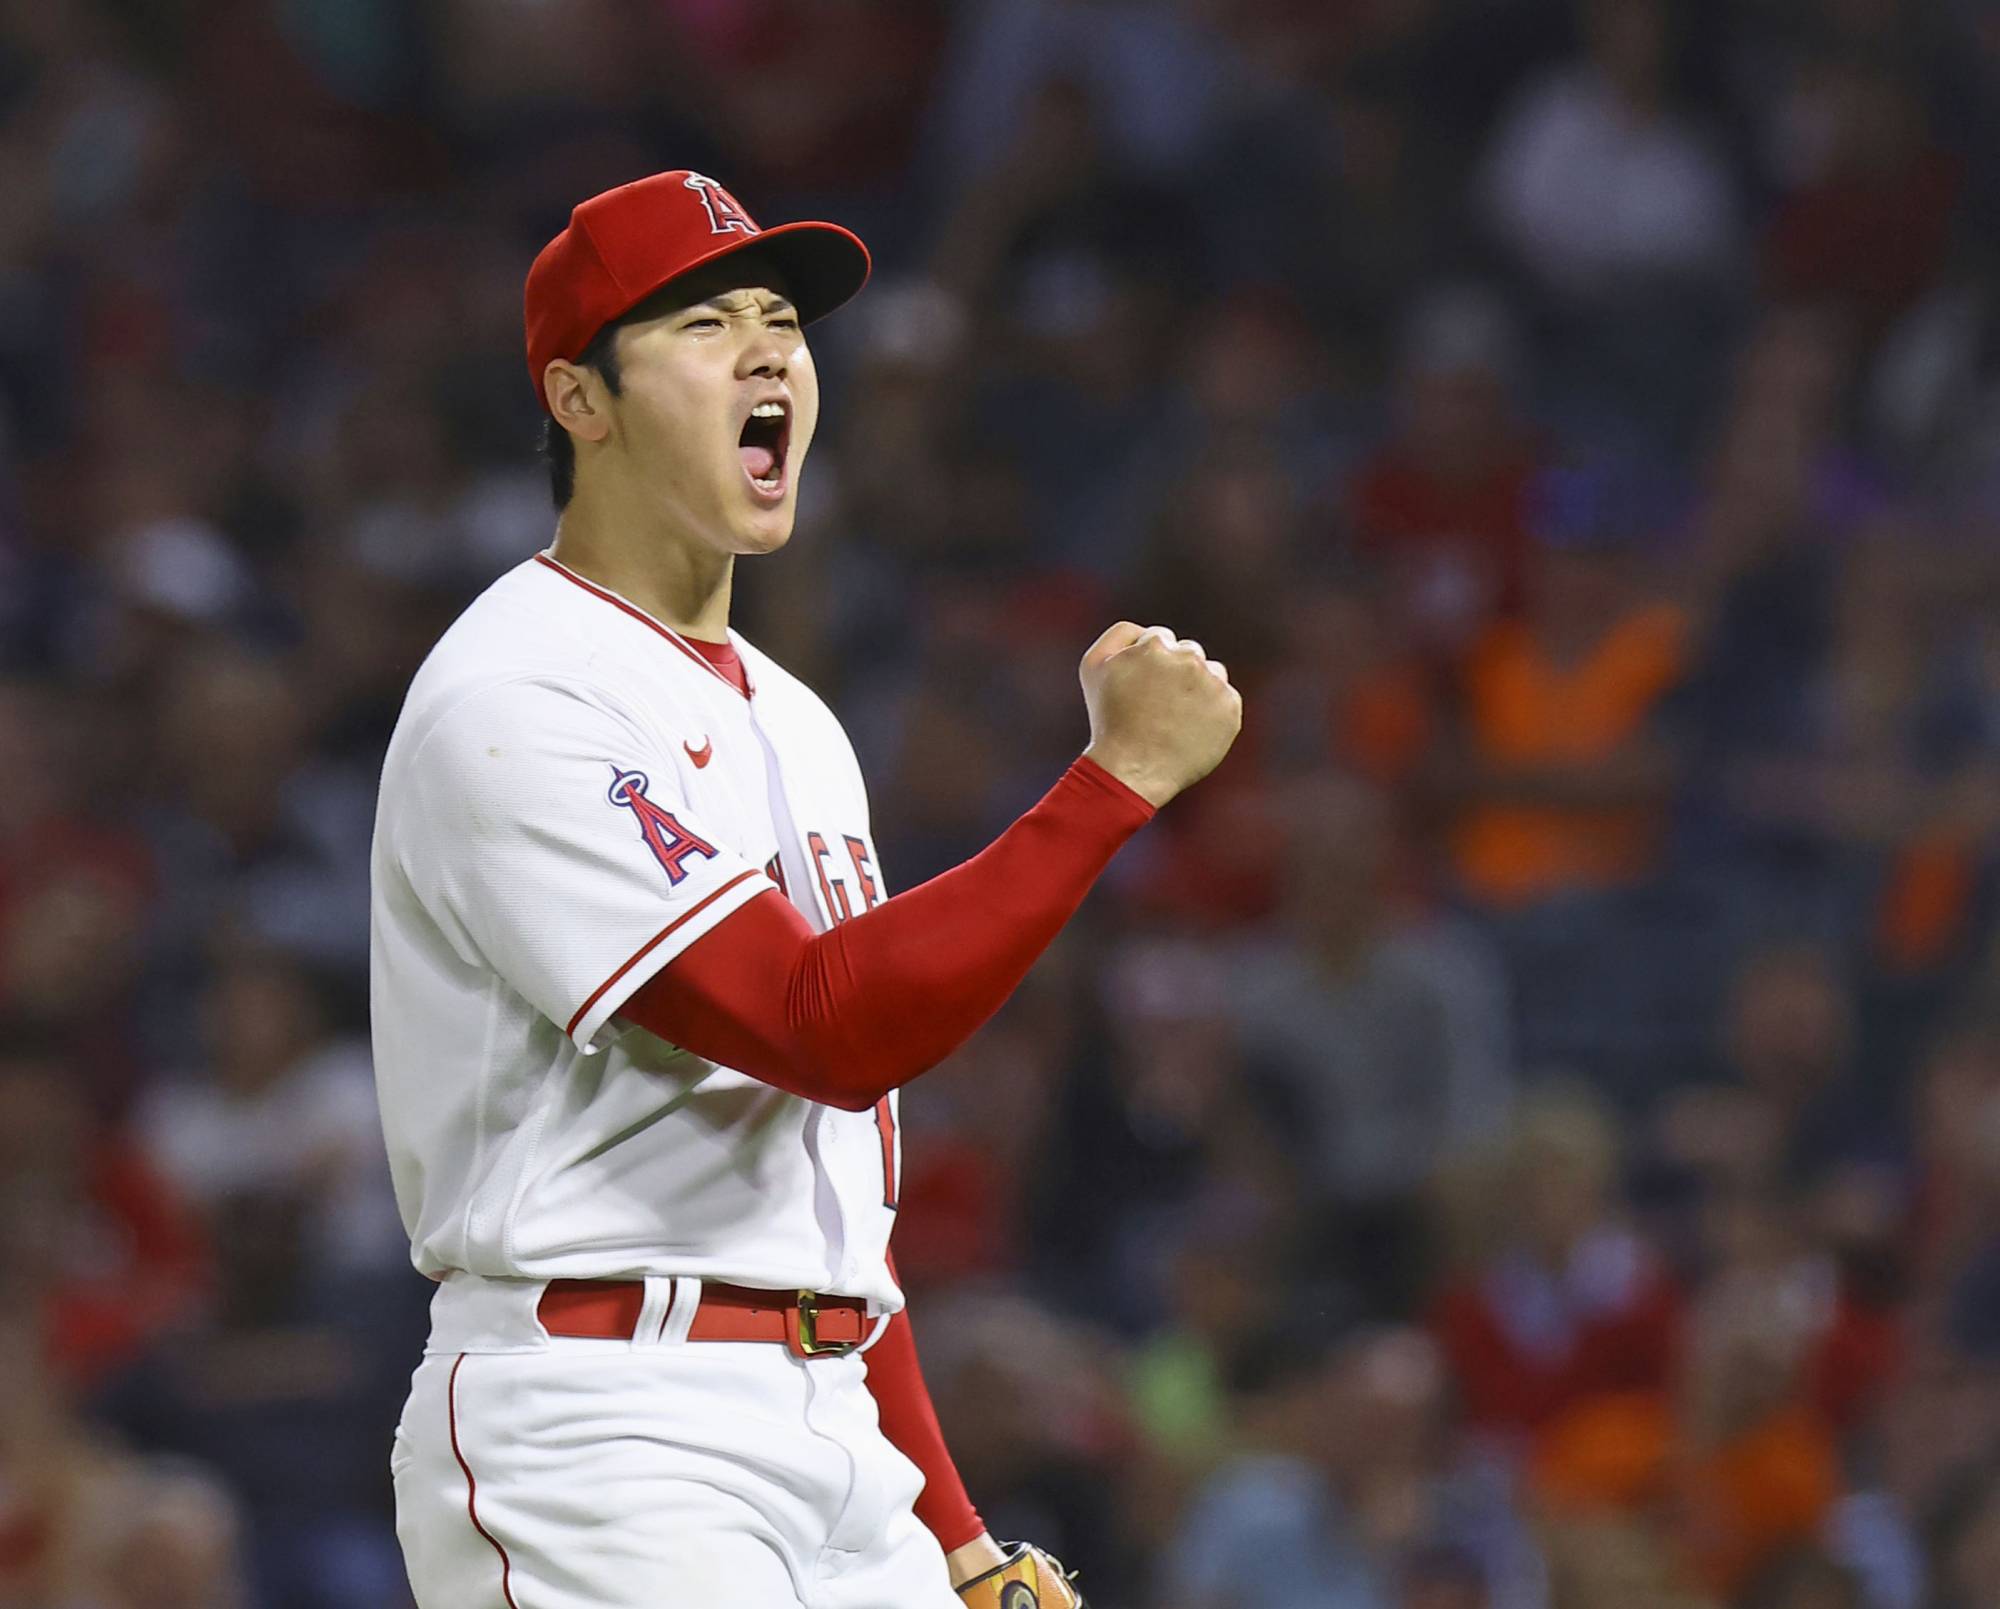 Shohei Ohtani strikes out 12 and drives in two runs with triple to power Angels to win